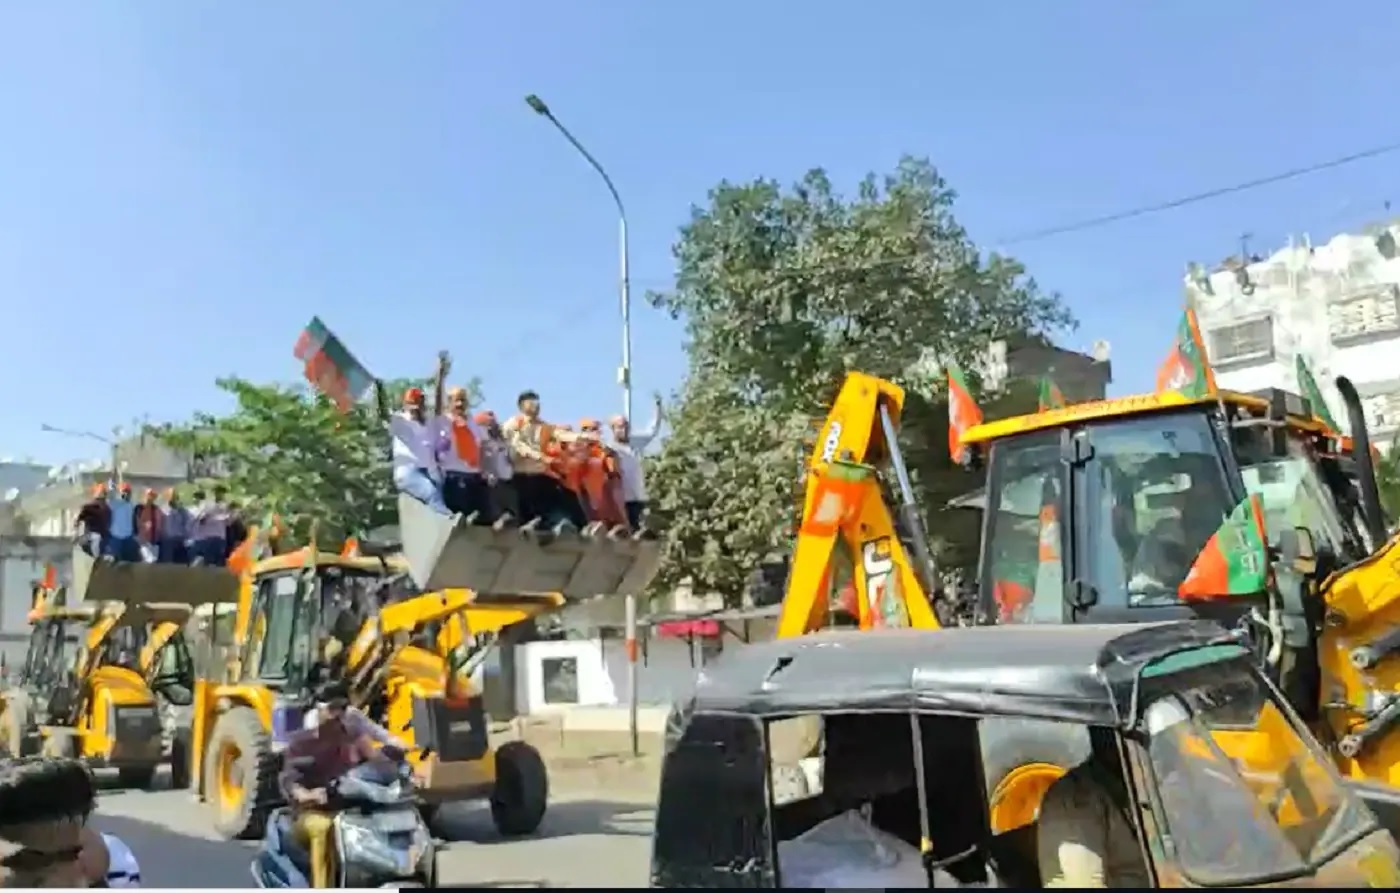 After Uttar Pradesh, Bulldozer entered the Gujarat election campaign! Campaigning with bulldozers in Surat